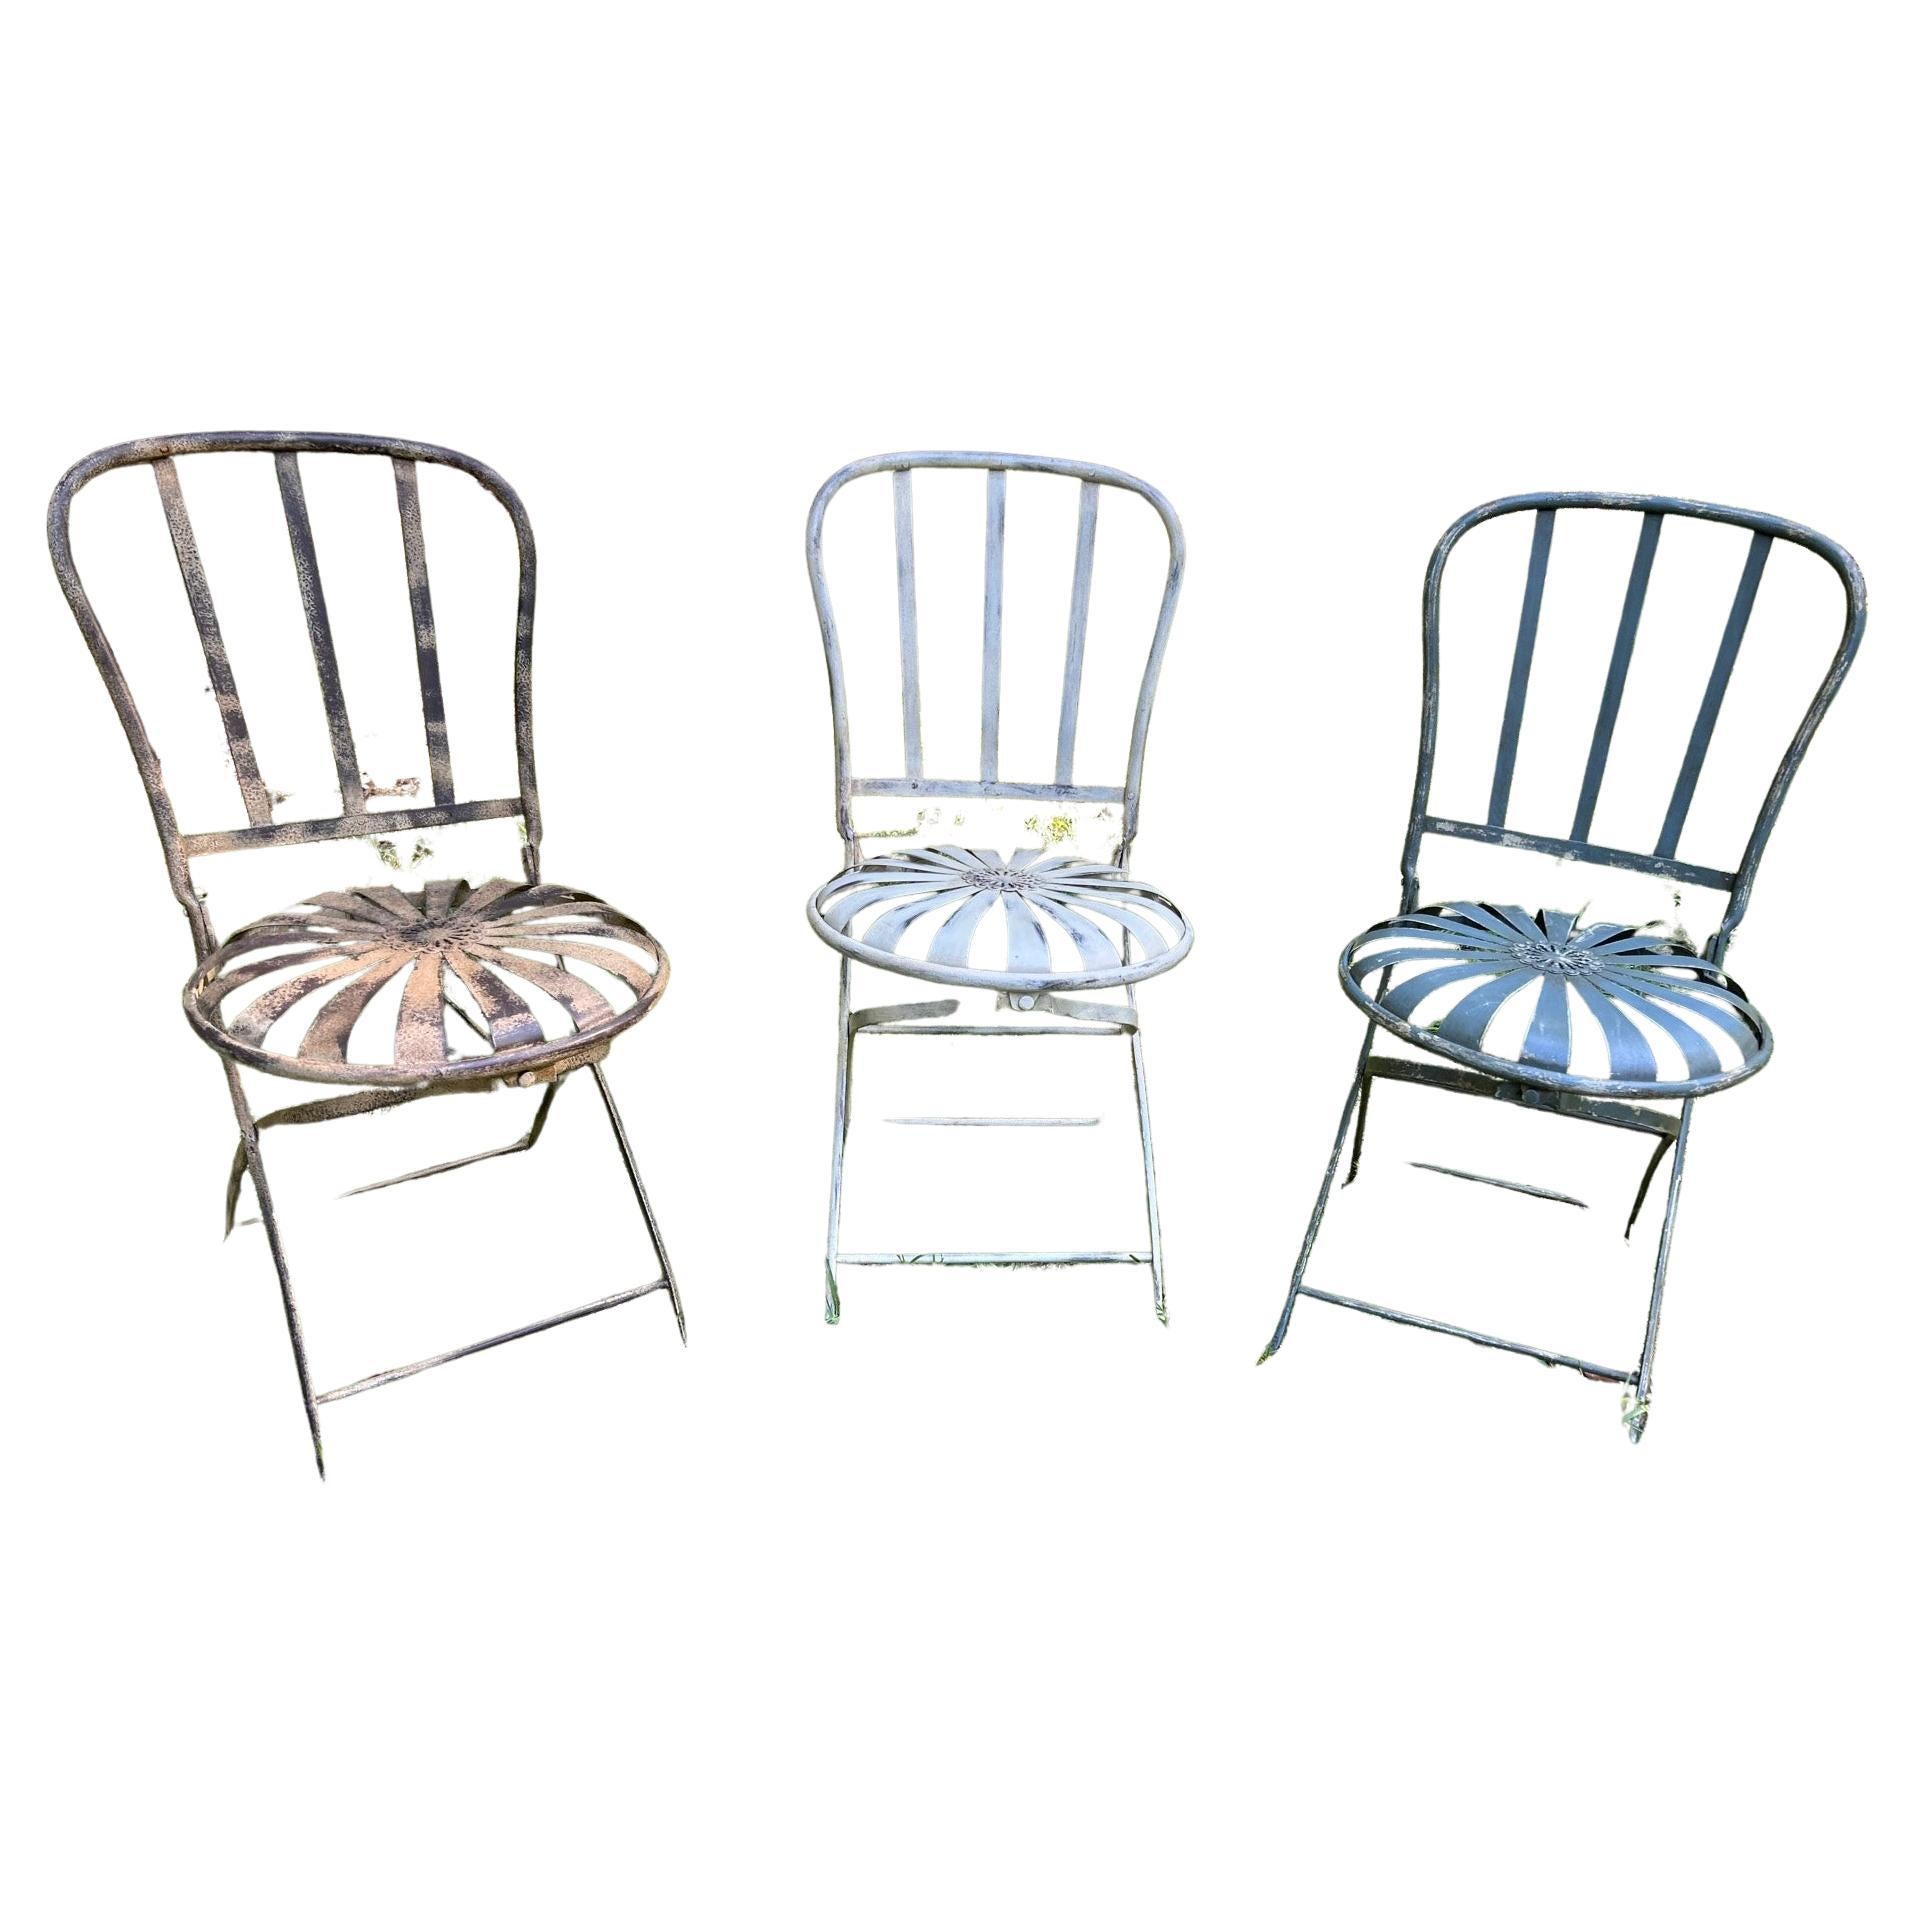 Francois Carre Strap Iron Folding Chairs - Set of 3 For Sale